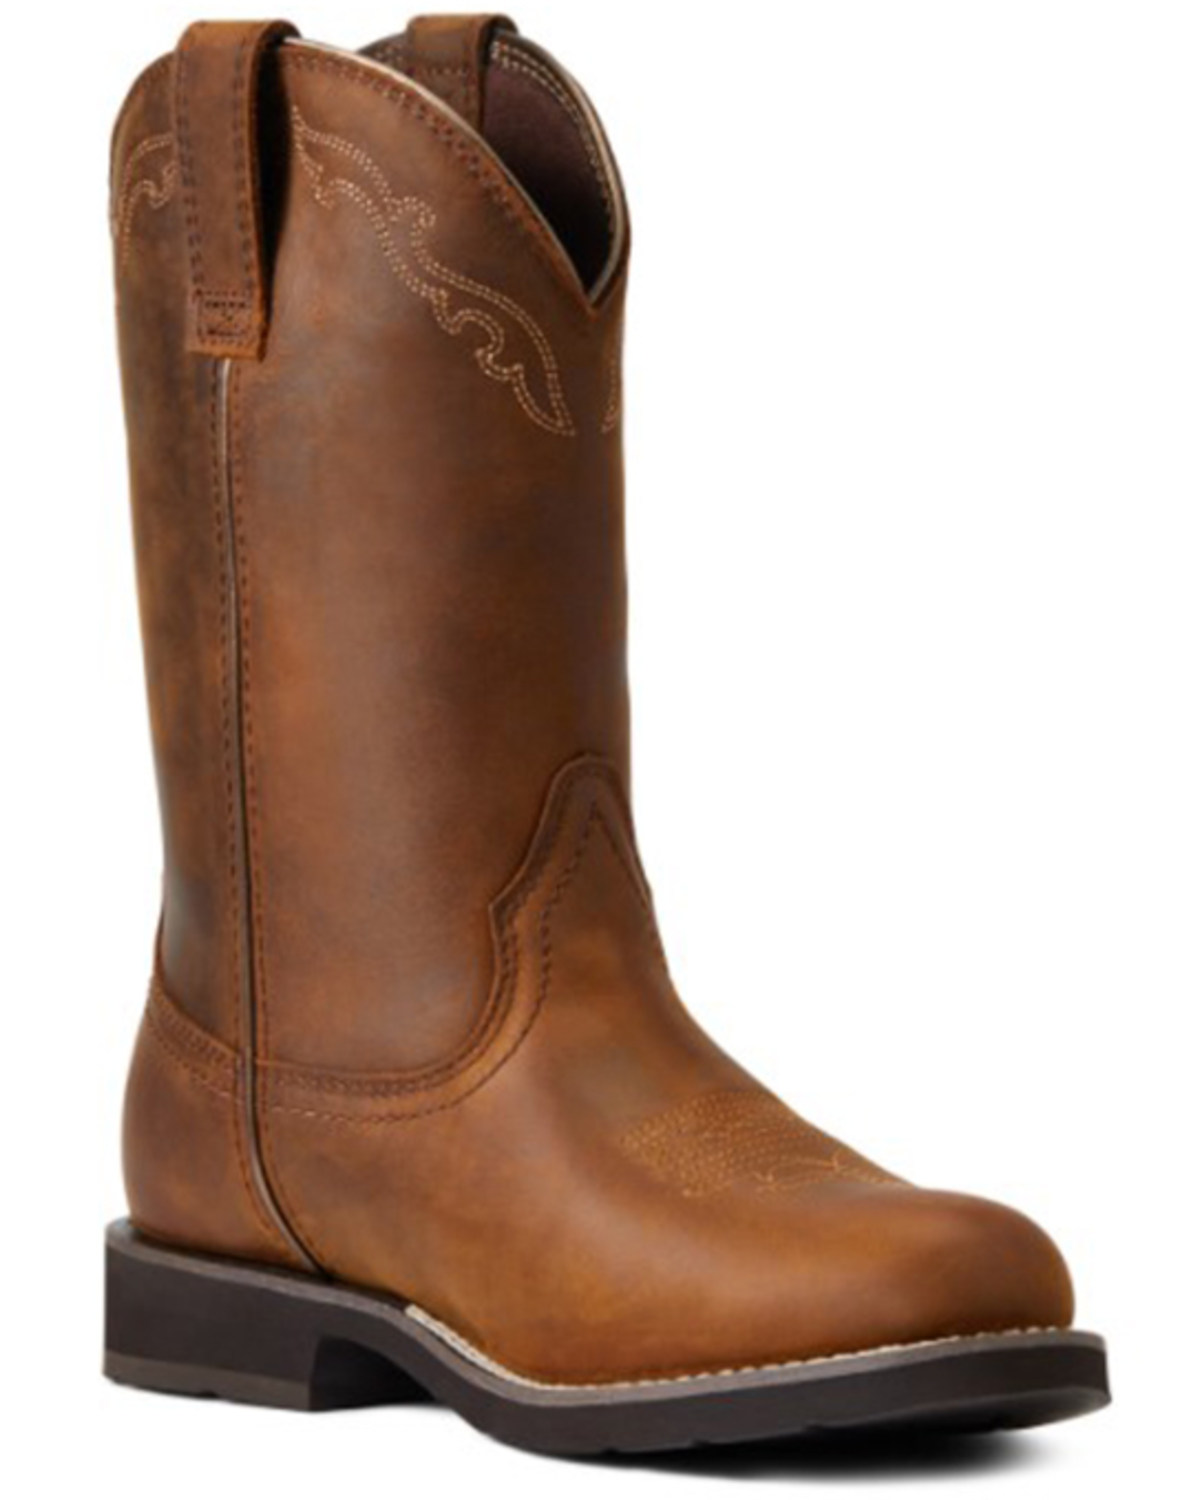 Ariat Women's Delilah Waterproof Western Performance Boots - Round Toe